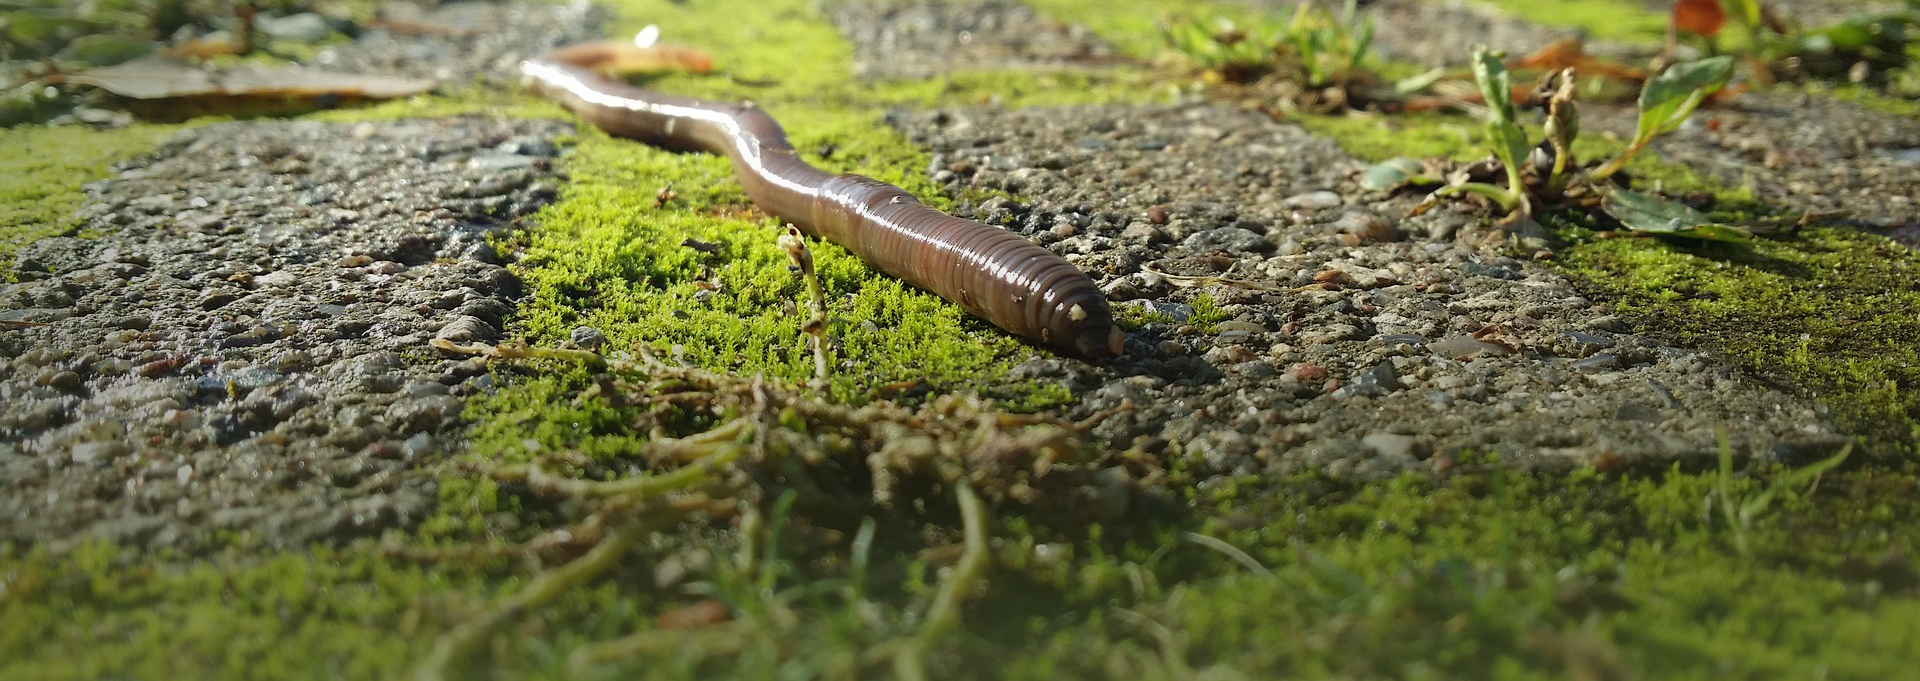 earthworm above ground covered in moss as feature image for worm castings article